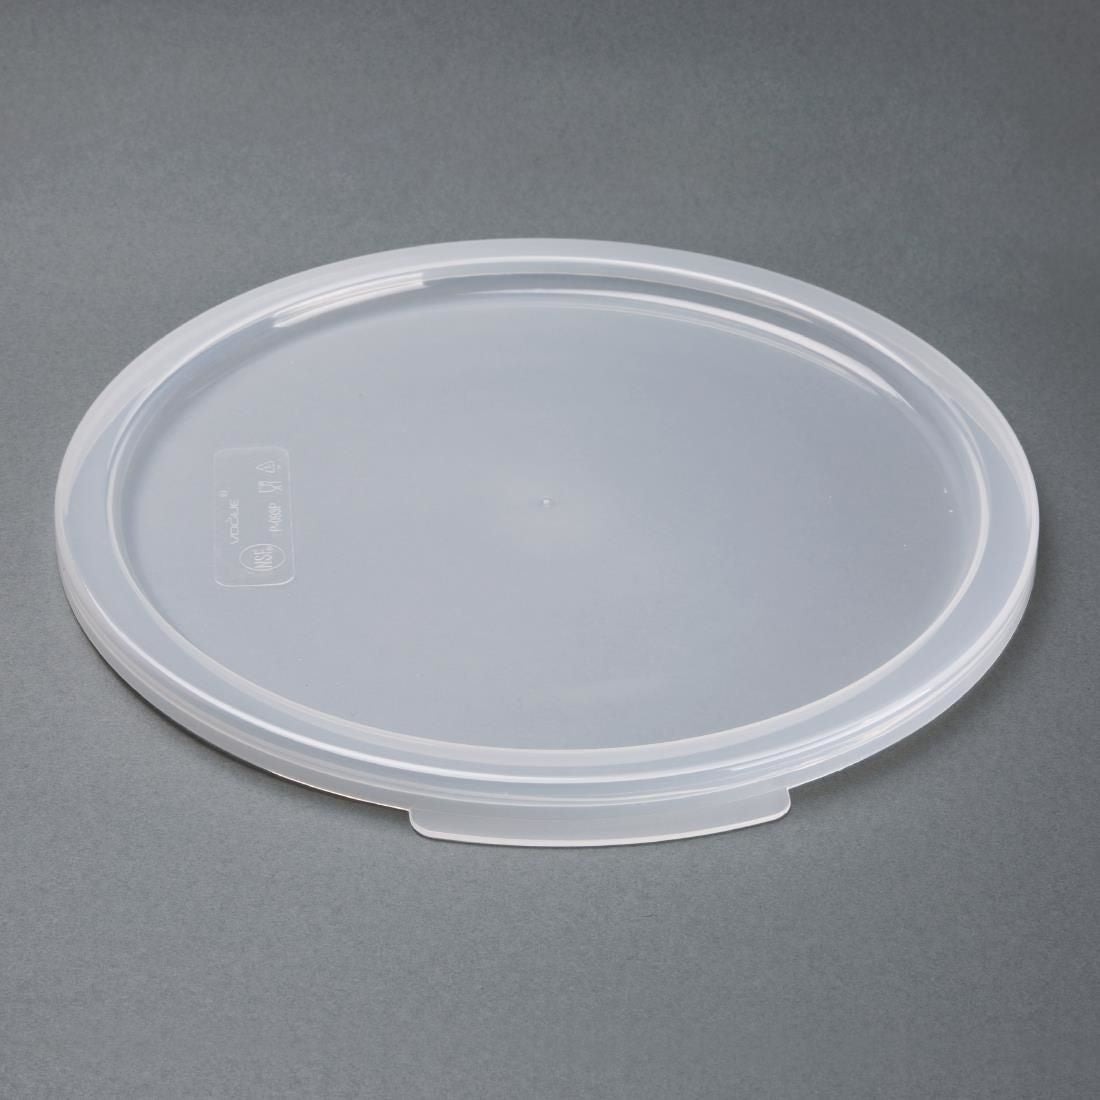 DJ964 Lid for Vogue Round Container 10 and 20 Ltr JD Catering Equipment Solutions Ltd